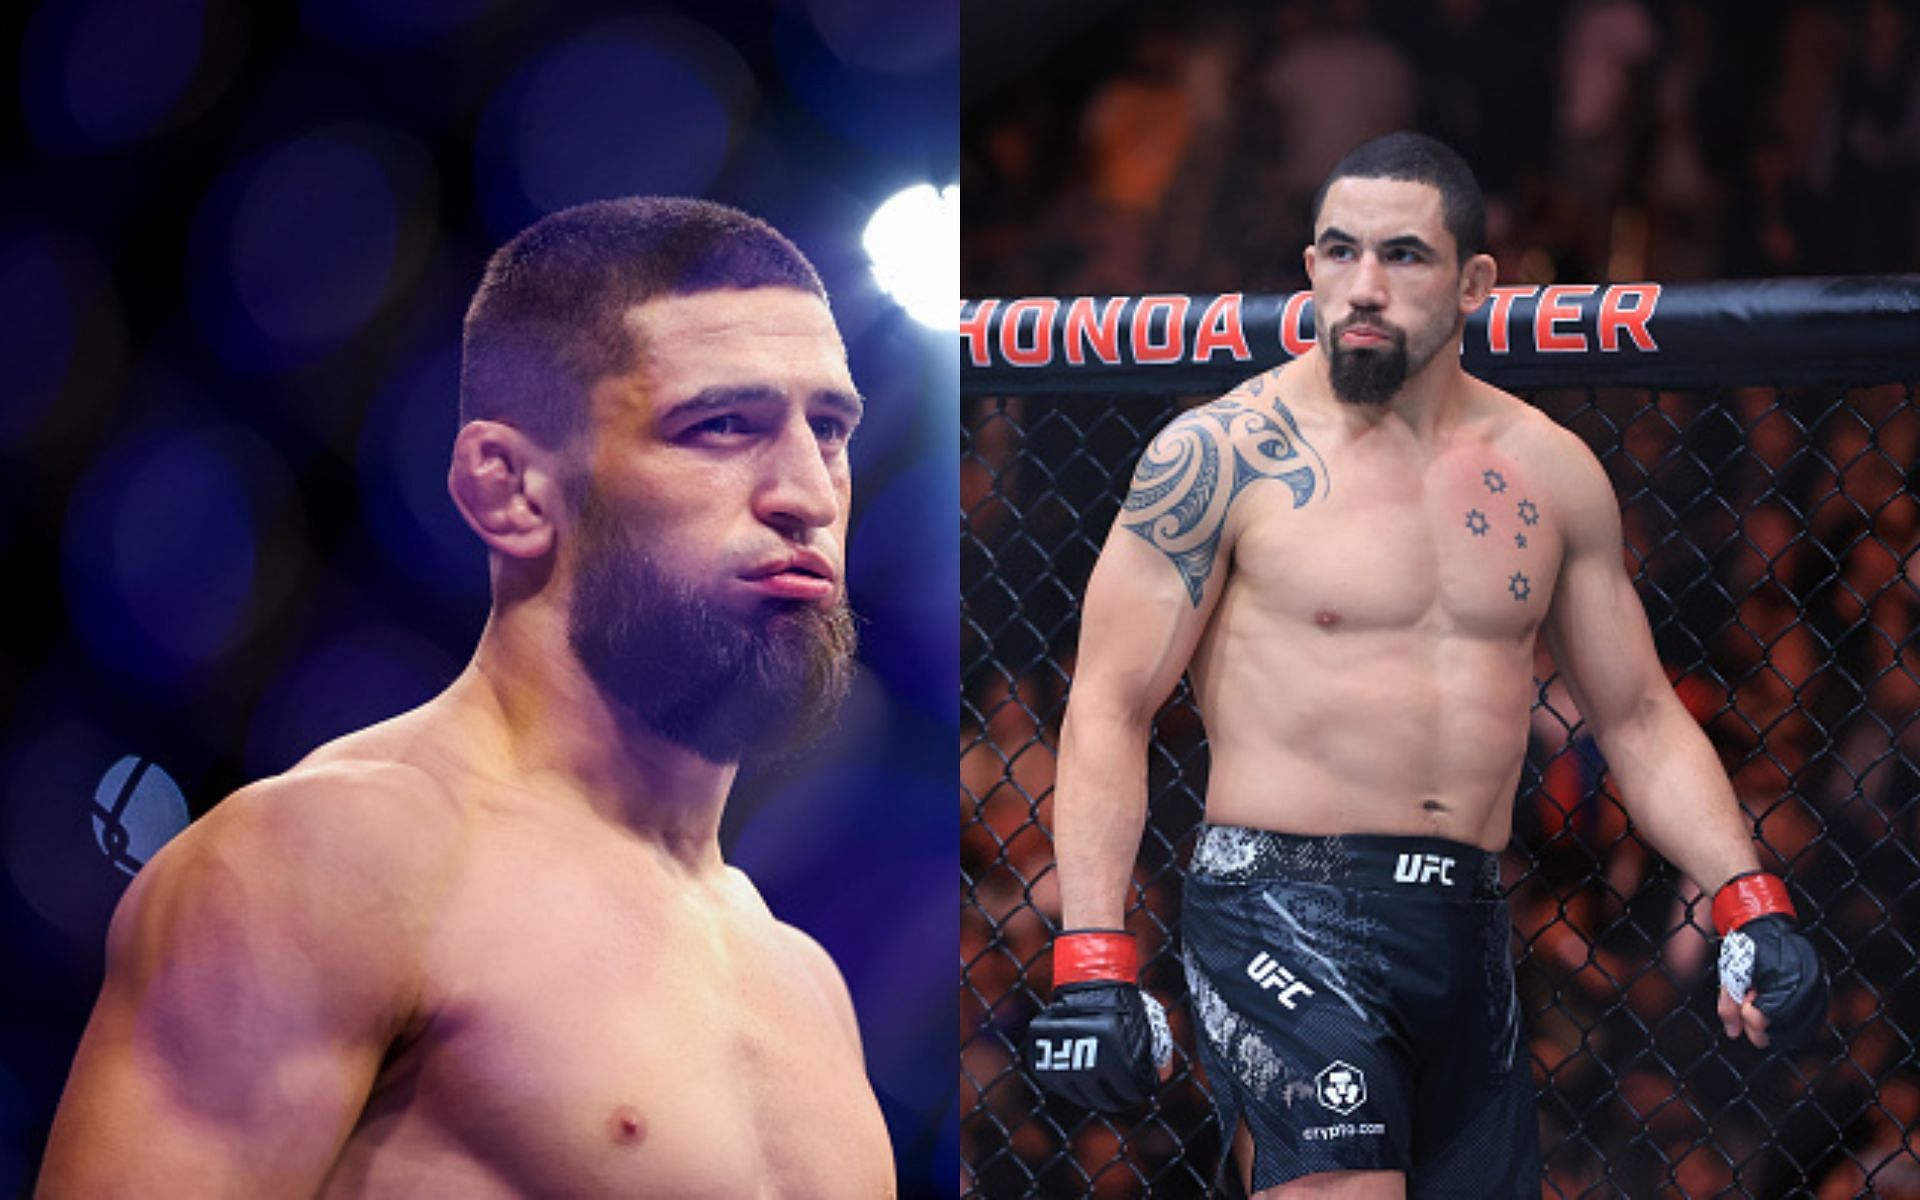 UFC Hall of Famer suggests Khamzat Chimaev could be in trouble against Robert Whittaker